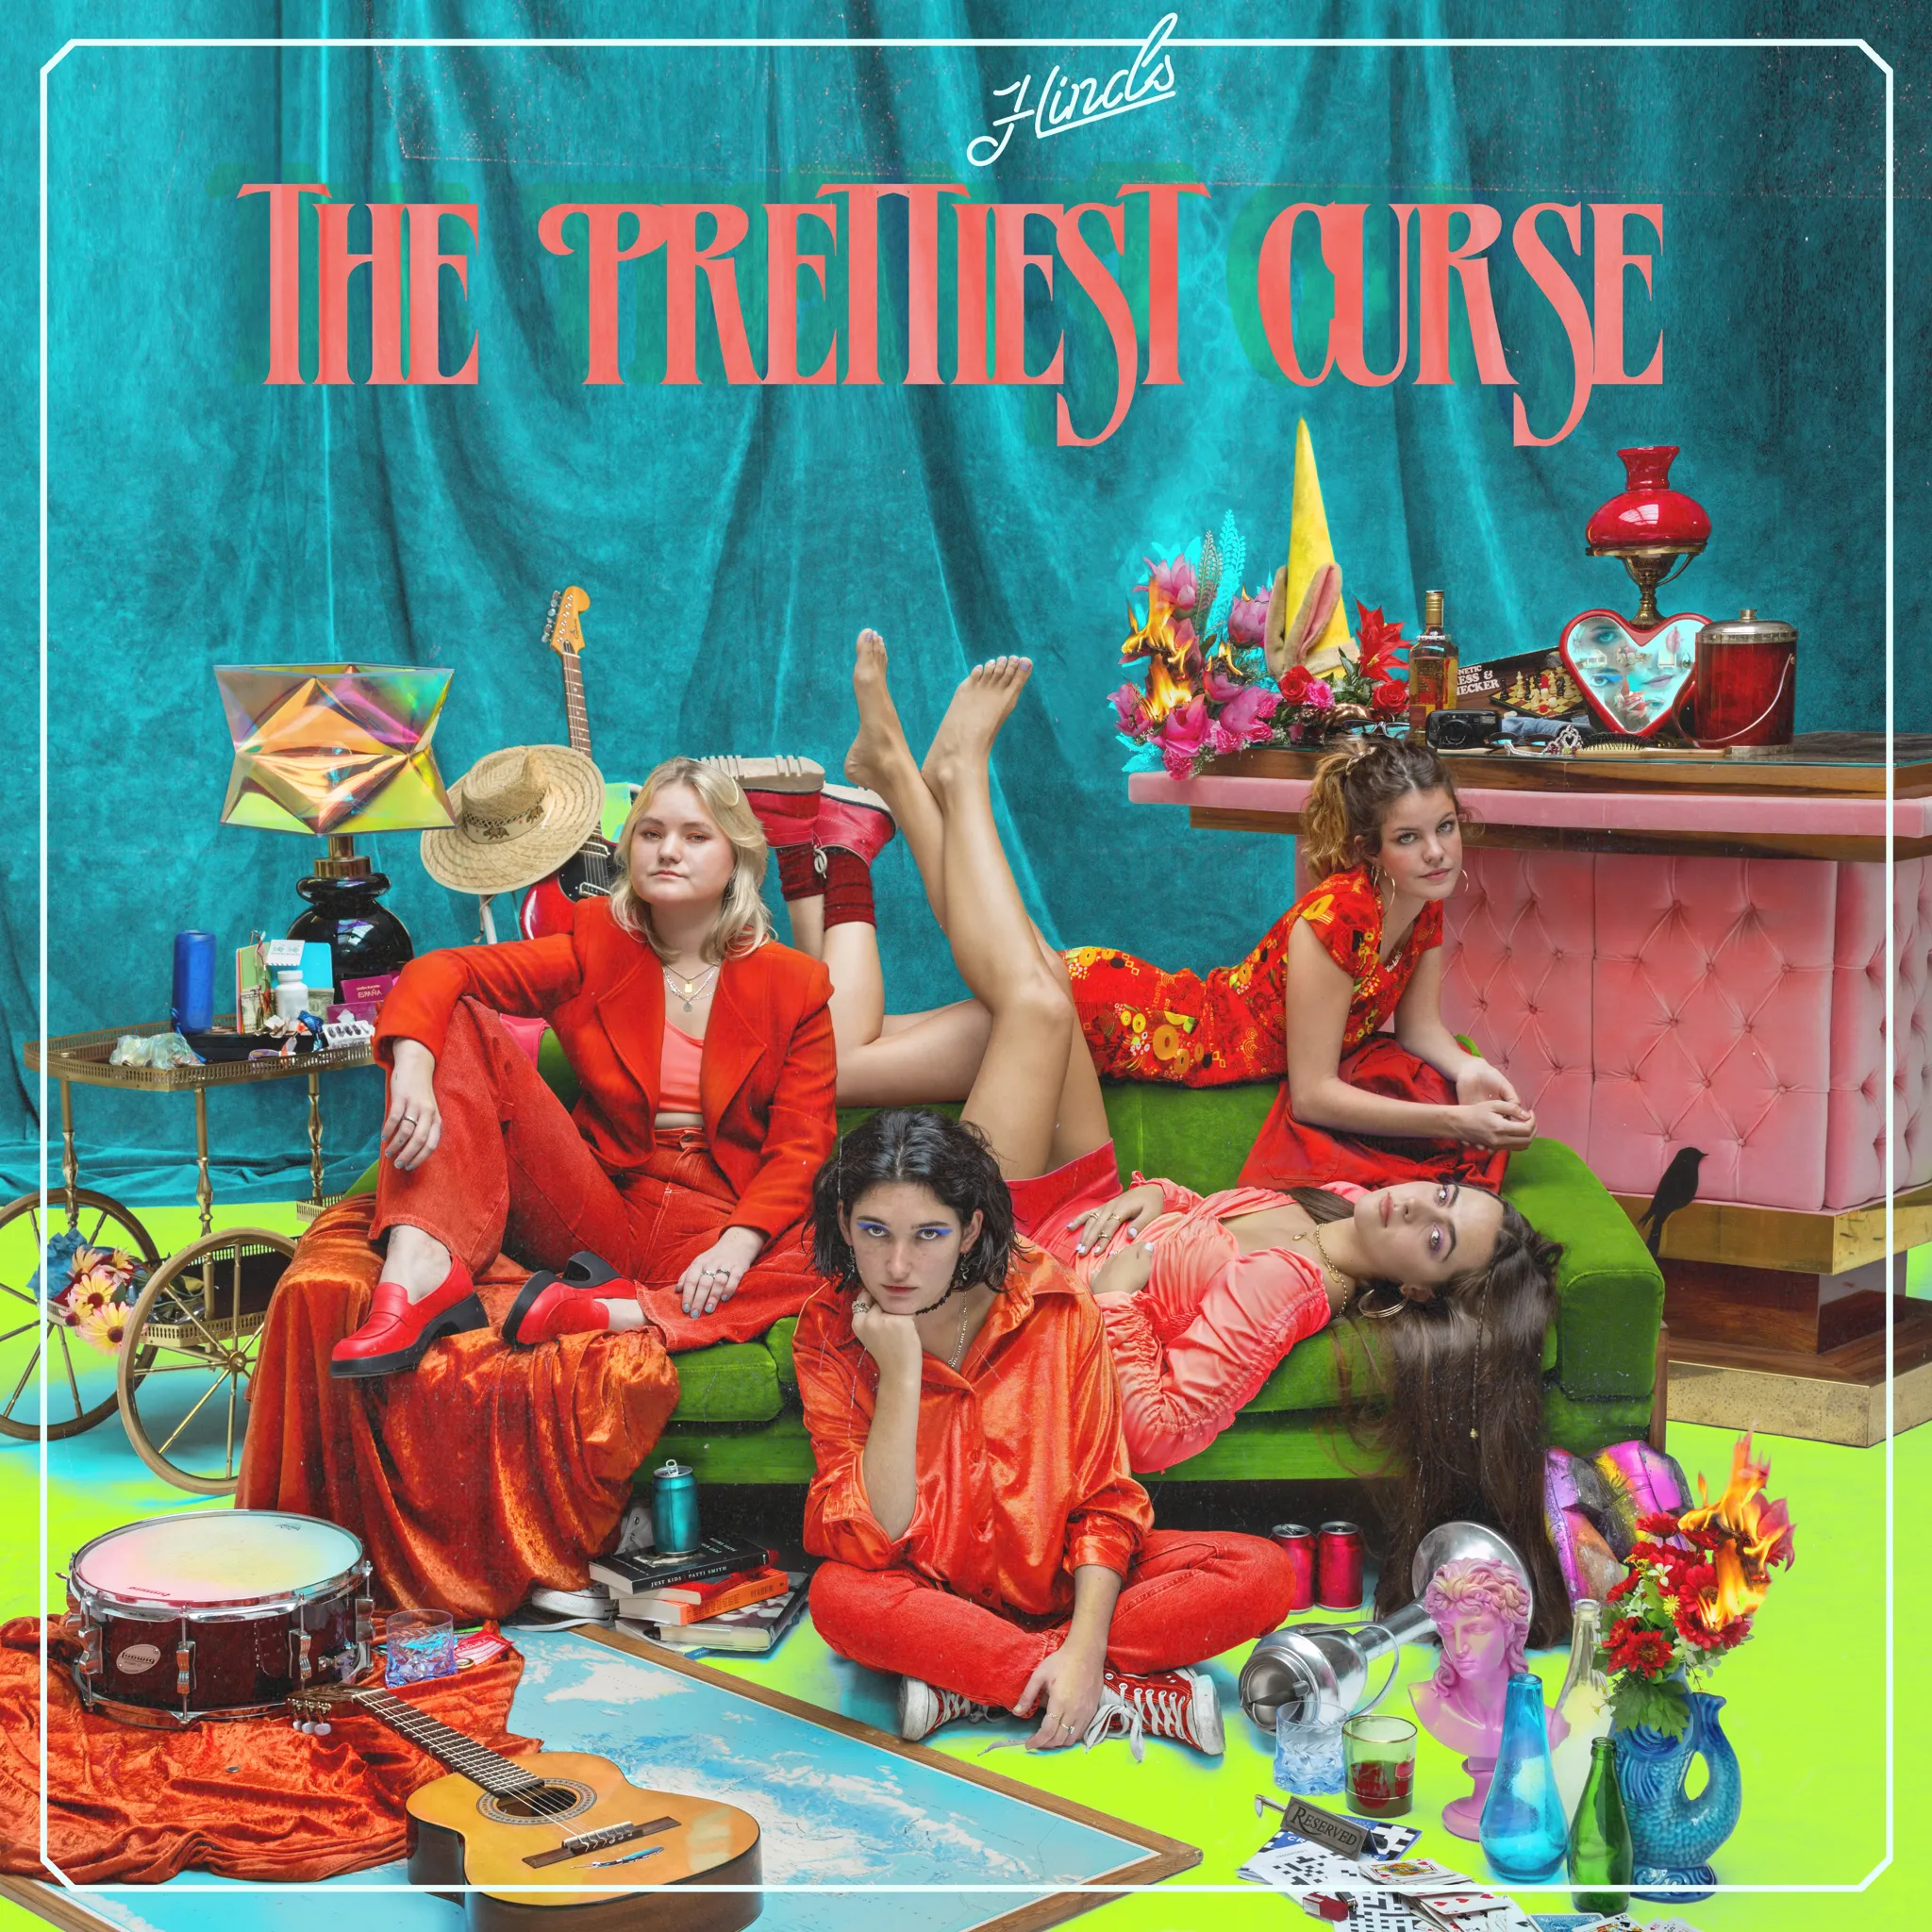 <strong>Hinds - The Prettiest Curse</strong> (Vinyl LP - black)